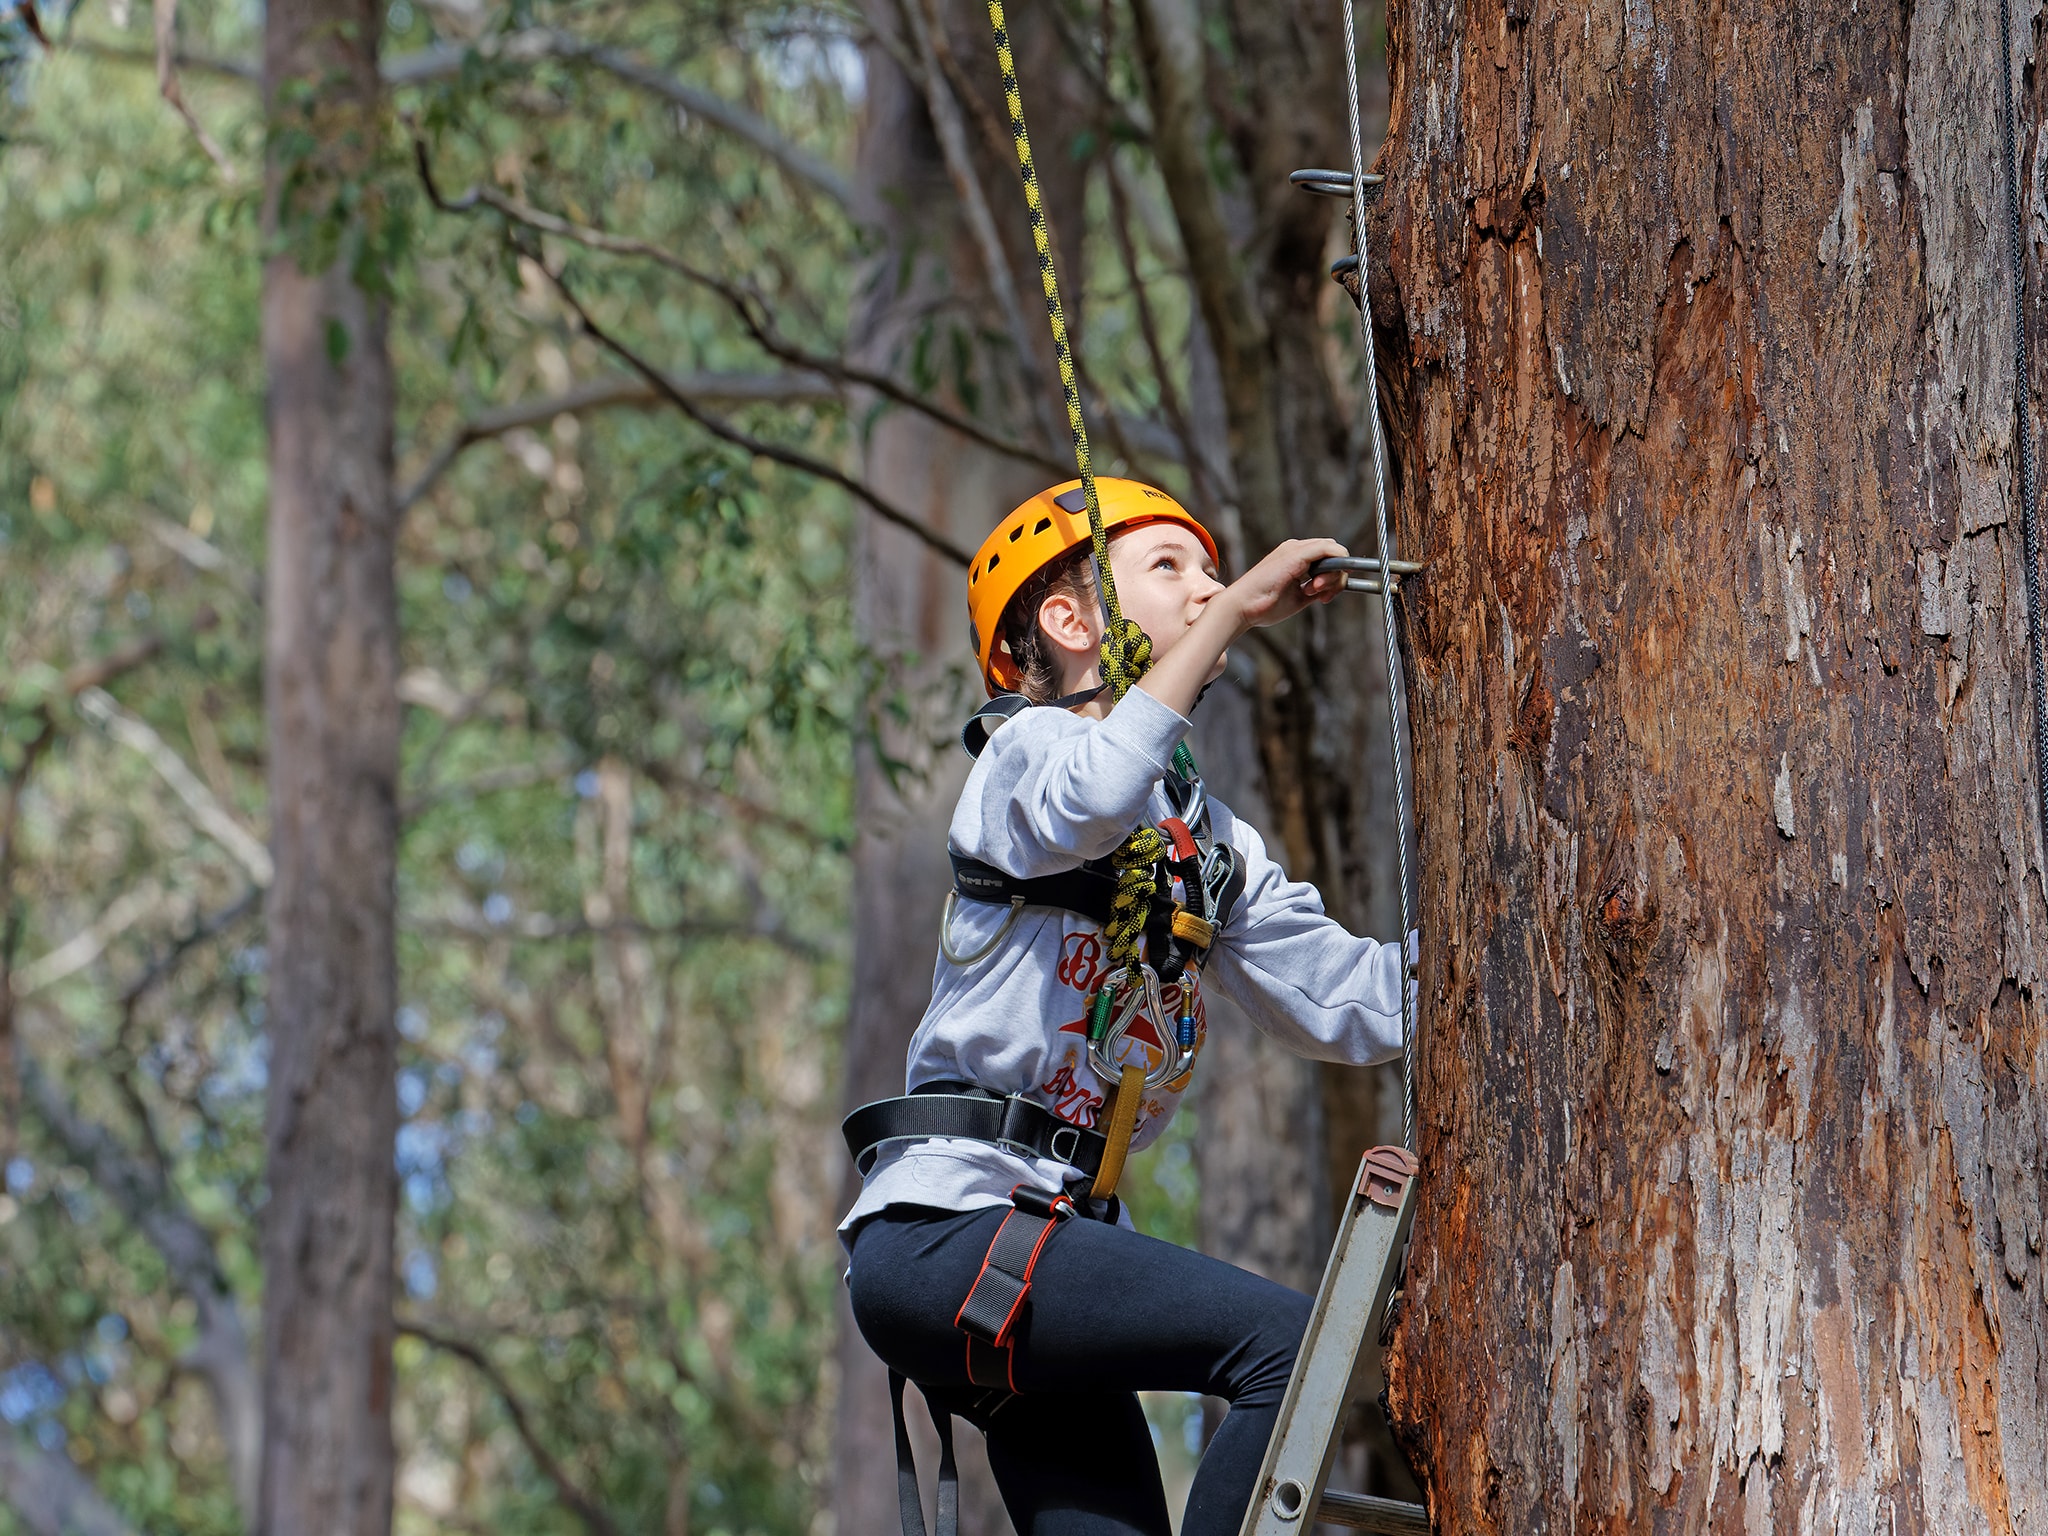 A young person wearing a helmet and harness at PGL camps climbs a tall tree, pausing to look up while standing on a ladder.